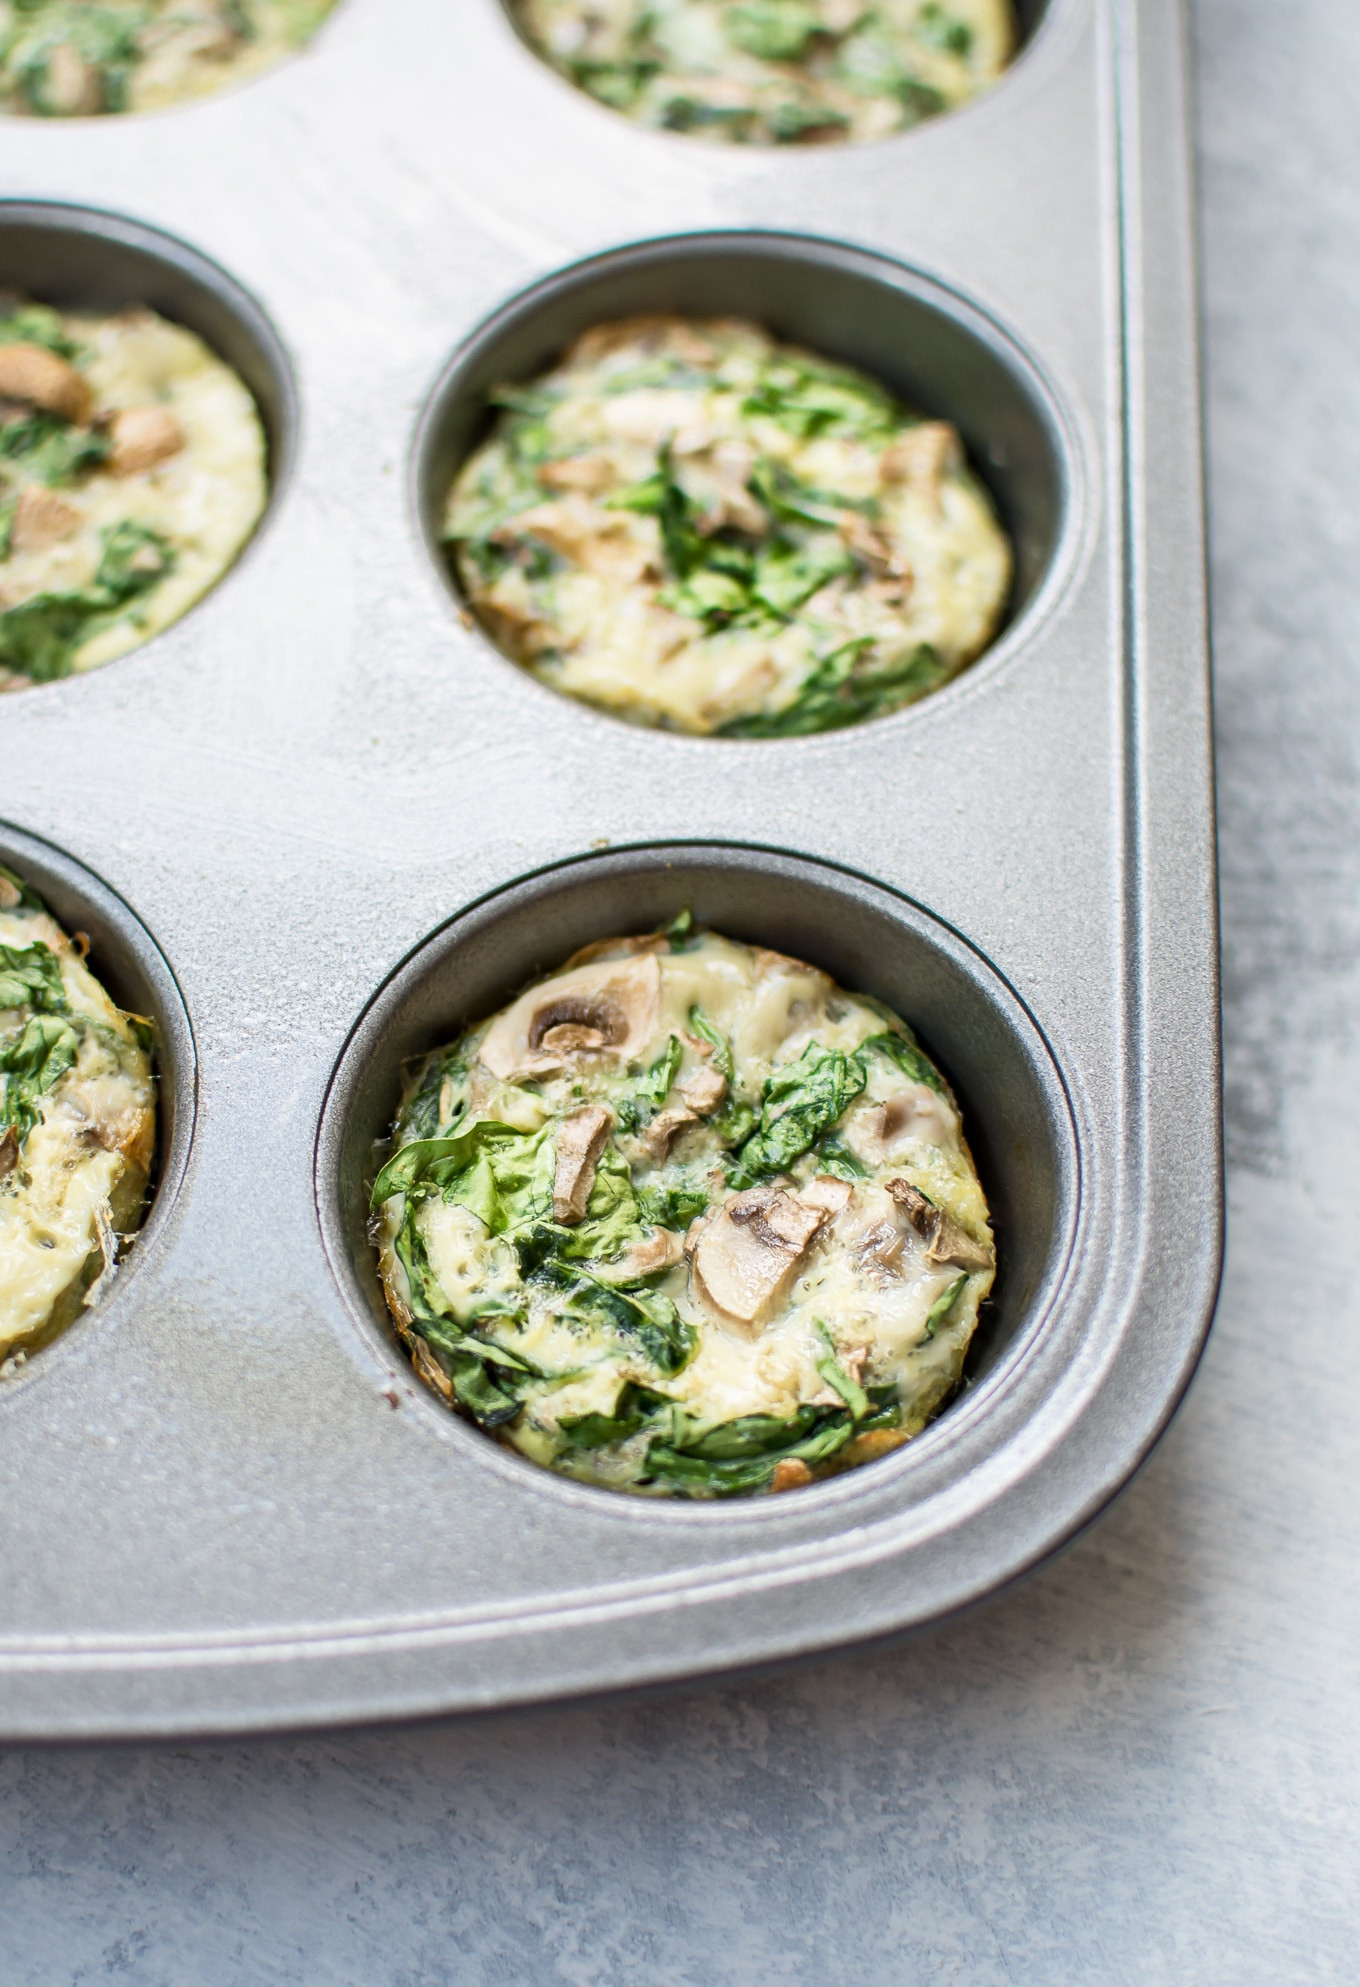 Healthy Breakfast Egg Muffins With Spinach
 healthy breakfast egg muffins with spinach